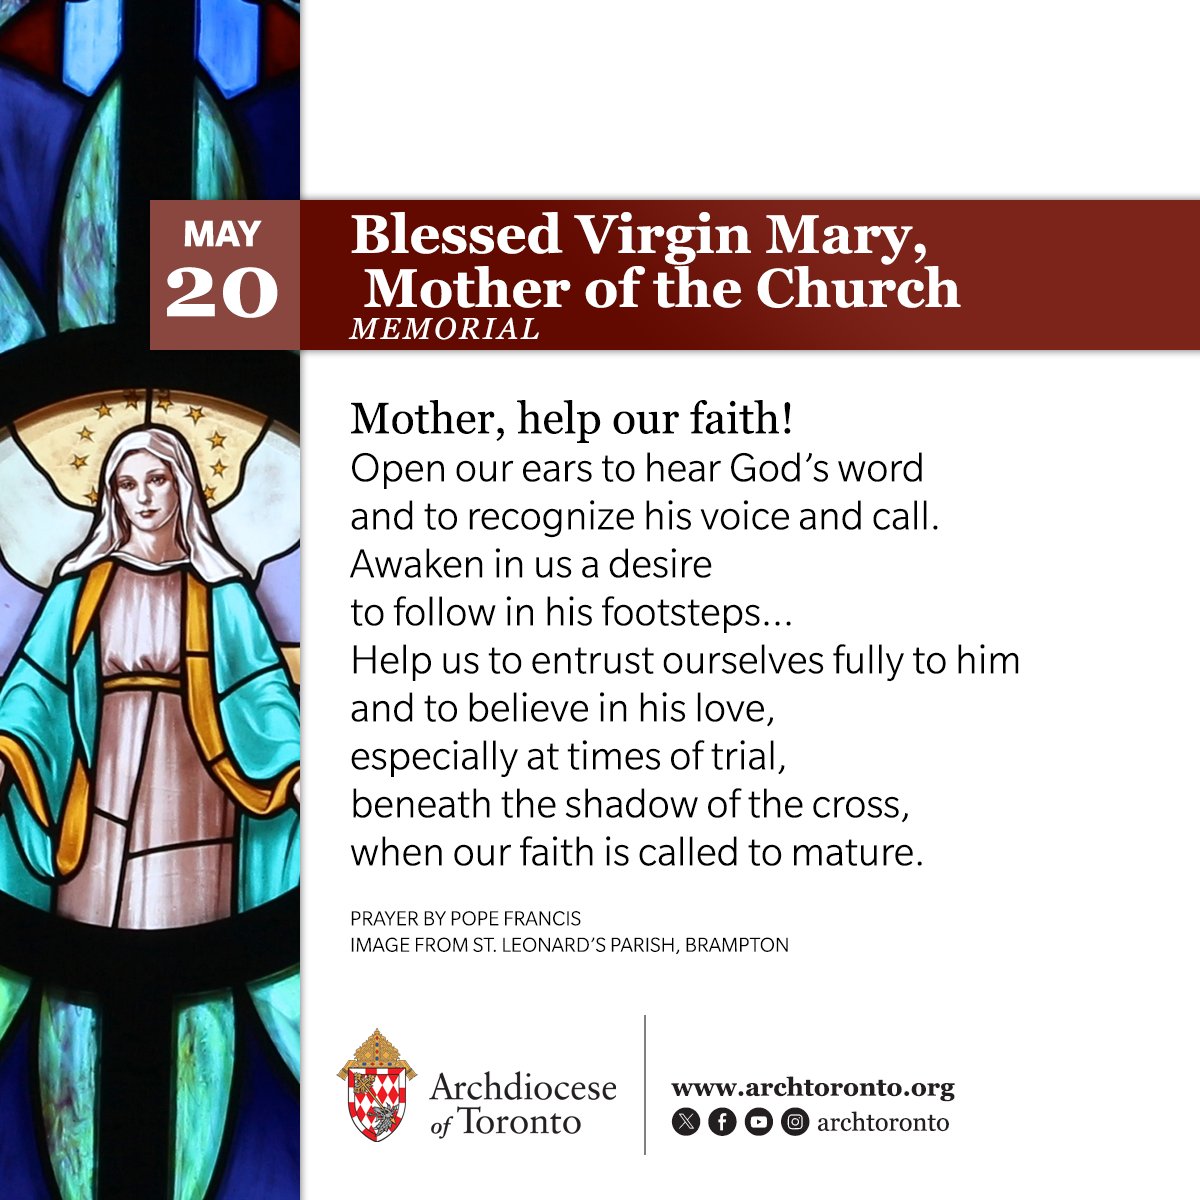 We celebrate the #memorial of the Blessed Virgin Mary, Mother of the Church, on the Monday following Pentecost Sunday. On this day, pray: Mother, help our faith! Open our ears to hear God's word and to recognize his voice and call. Learn more: bit.ly/BVMMotherOfThe…